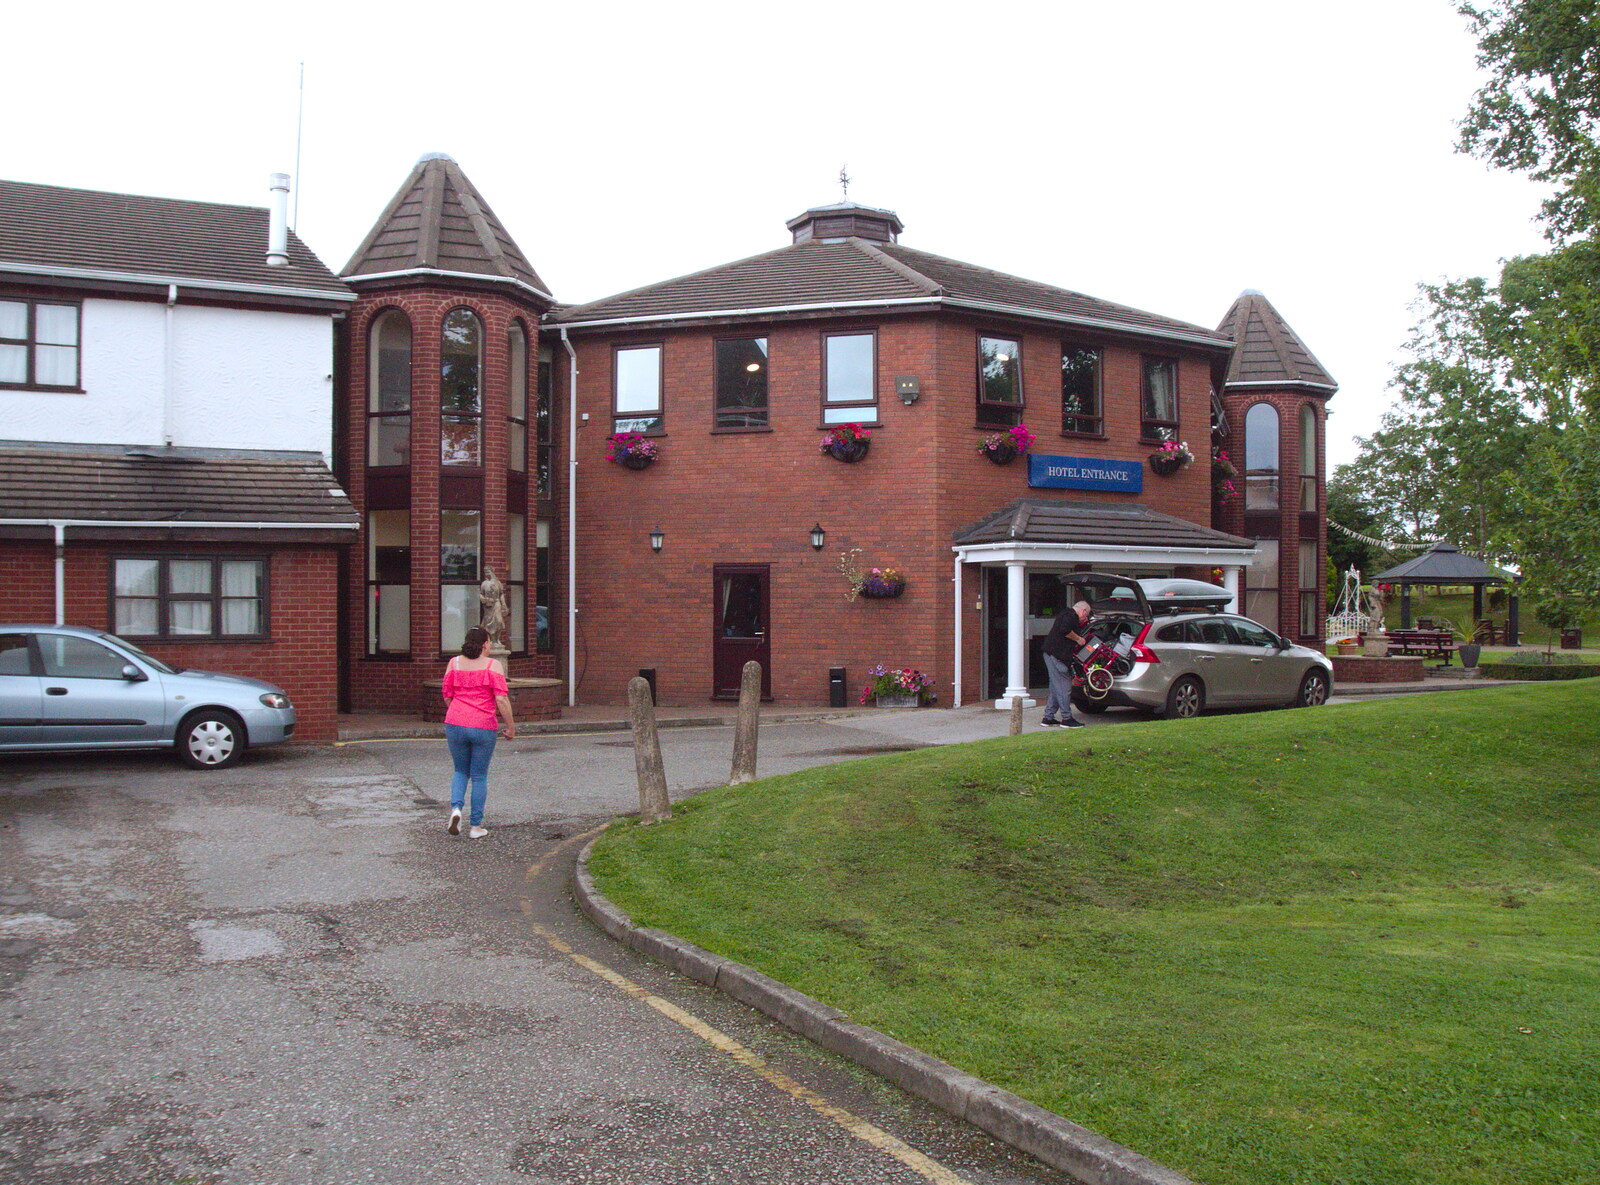 The Beaufort Park Hotel in Mold from The Summer Trip to Ireland, Monkstown, Co. Dublin, Ireland - 9th August 2019